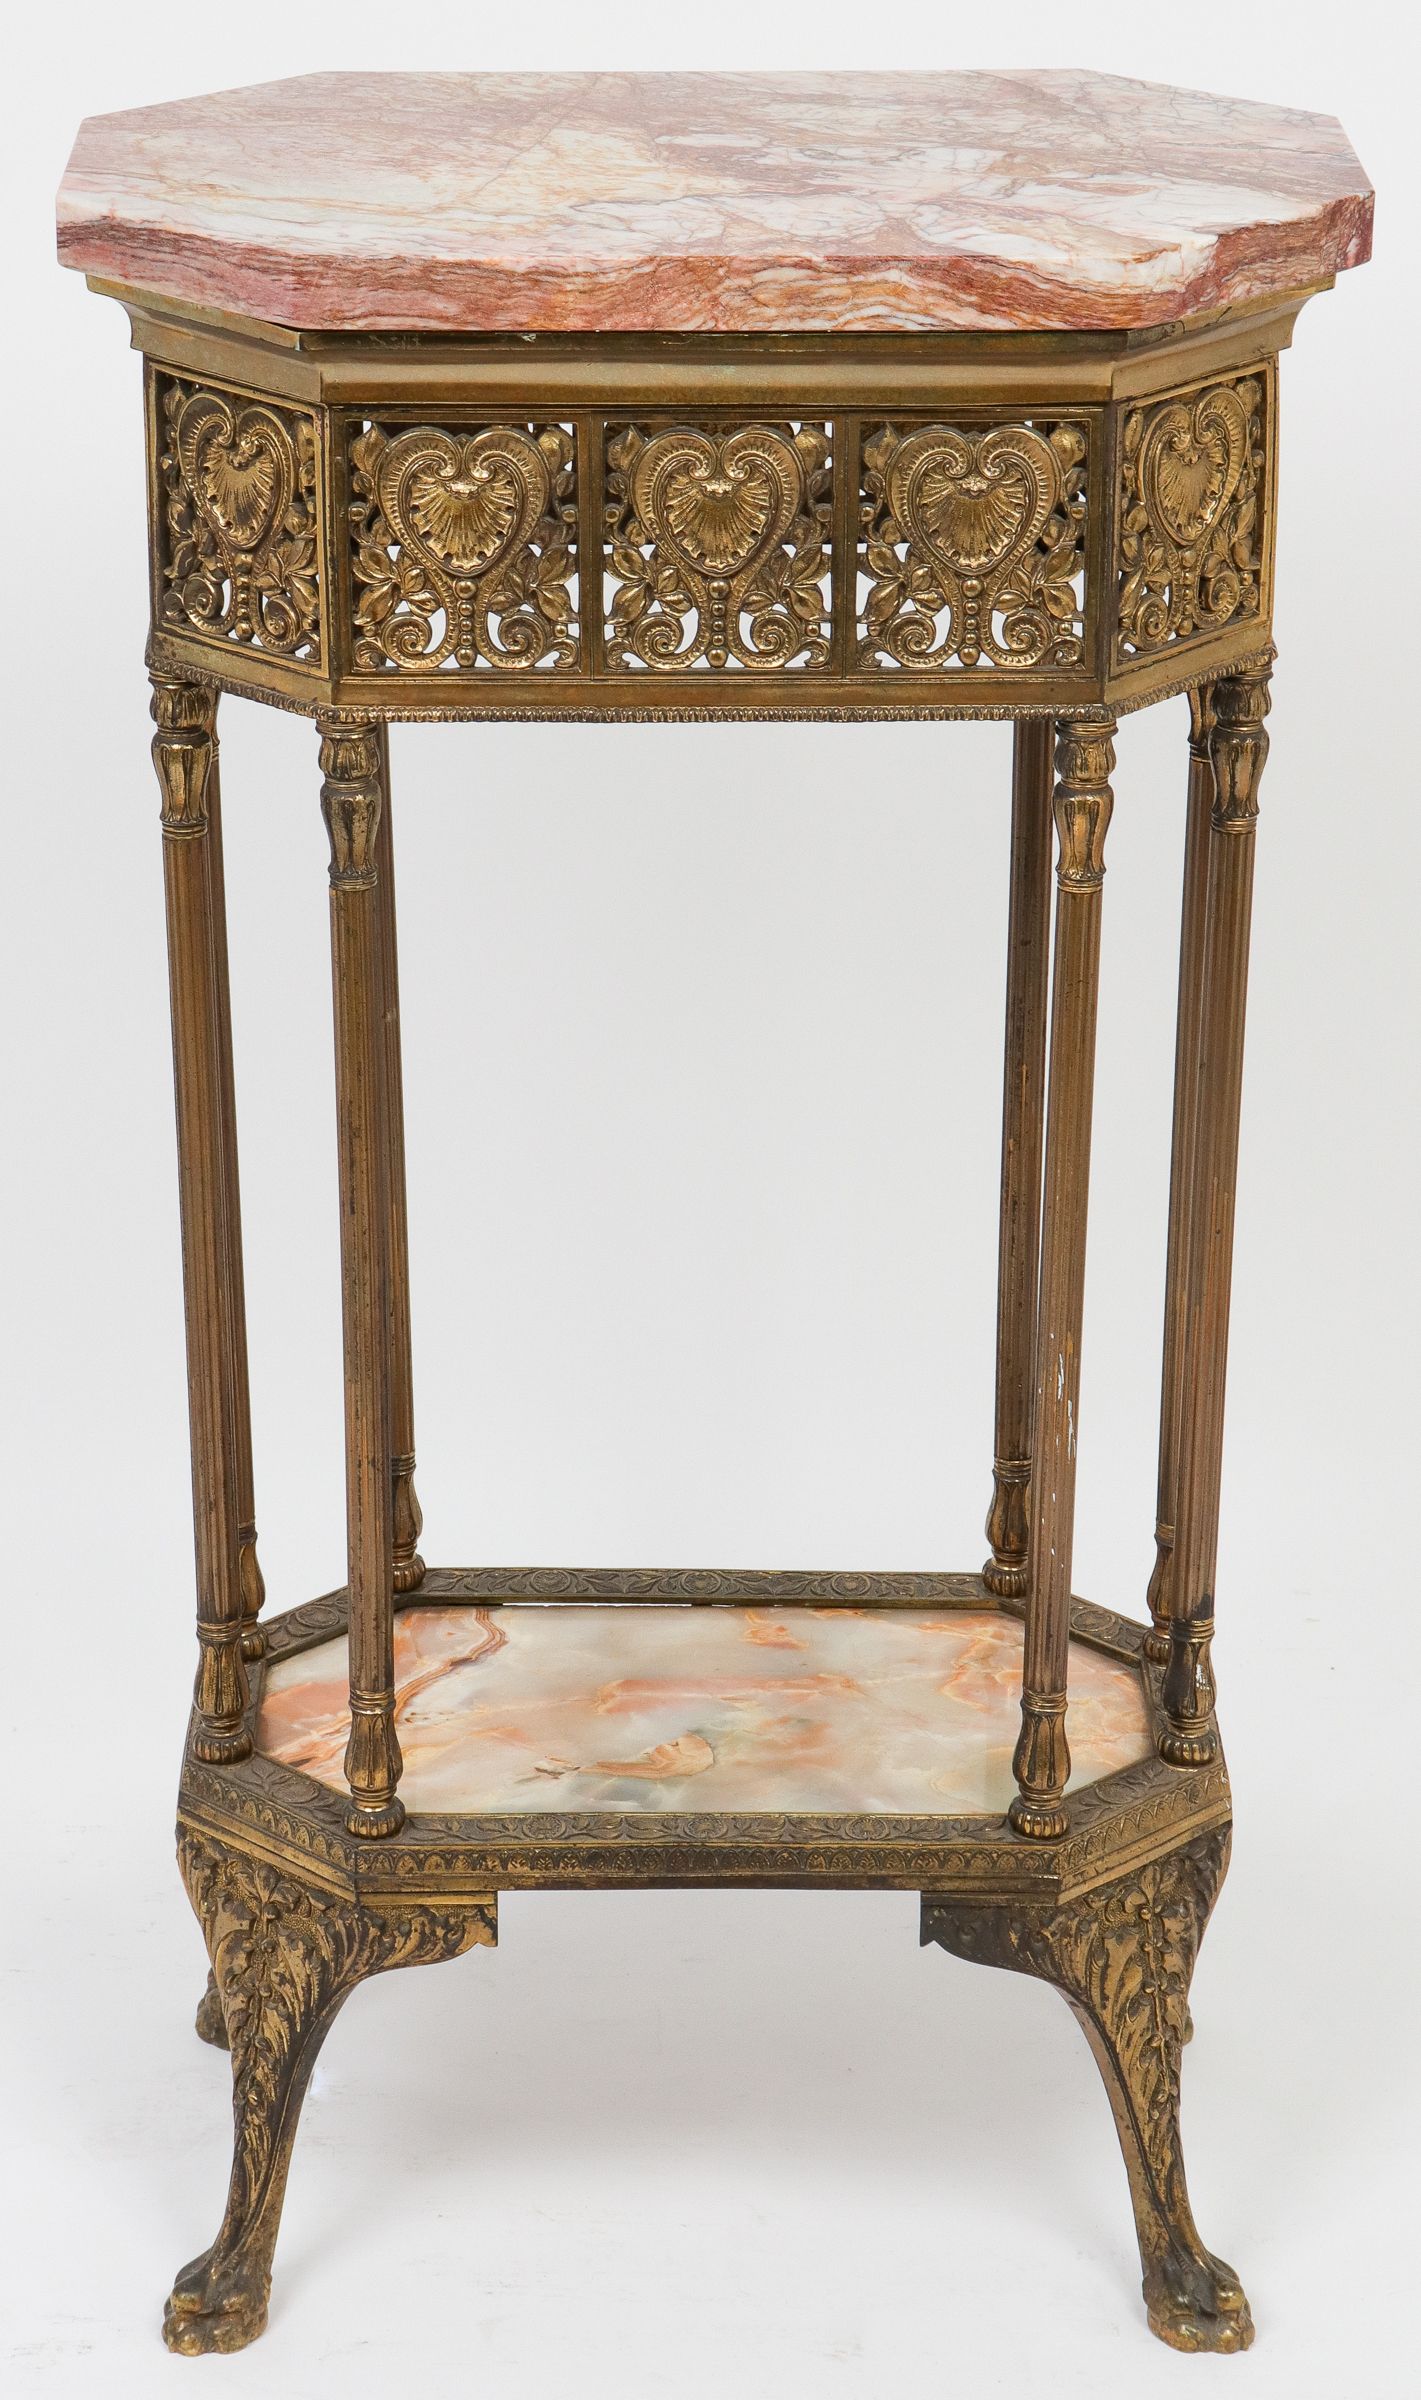 TWO-TIER GILT METAL, MARBLE, &